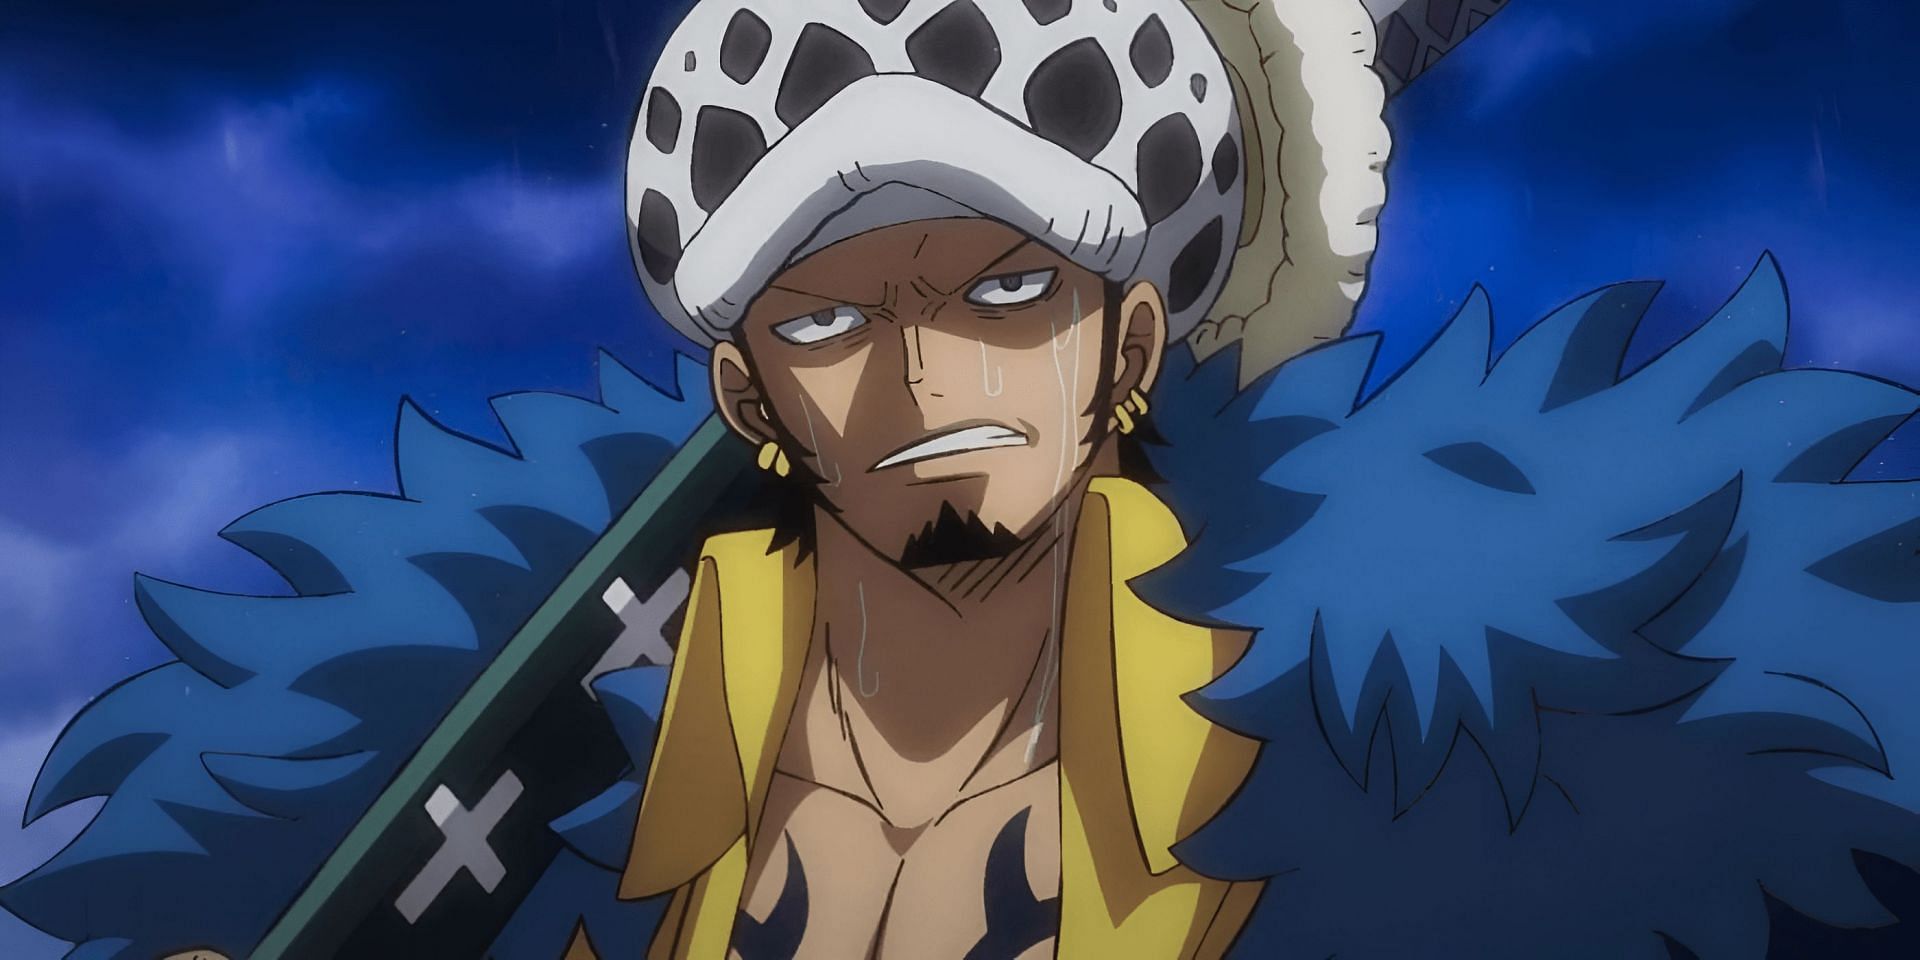 Law as seen in the anime (Image via Toei Animation)